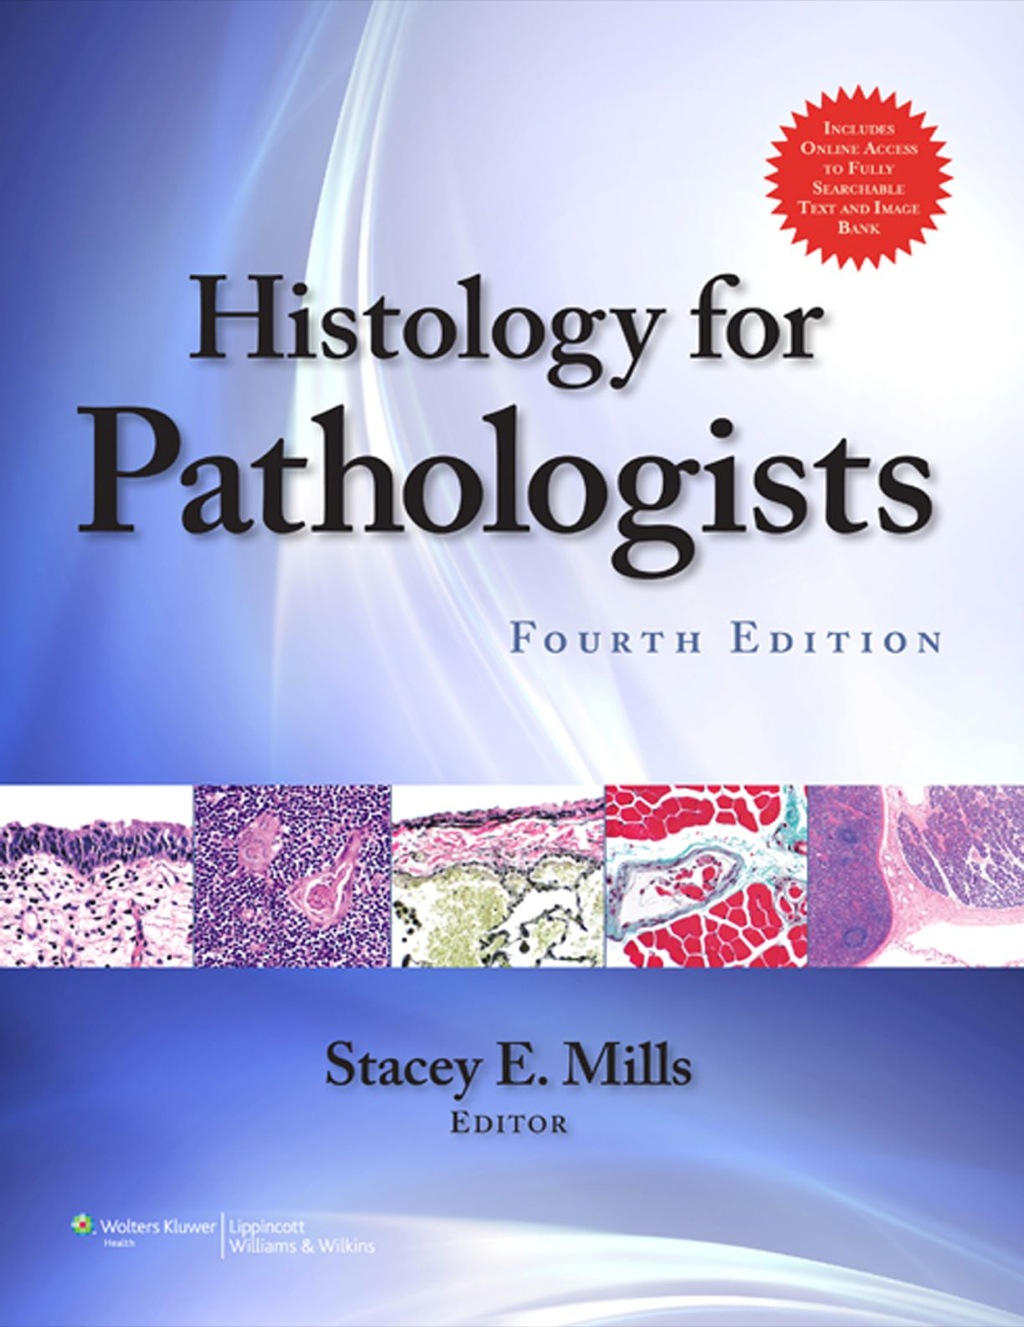 Histology for Pathologists (eBook) - Stacey E. Mills